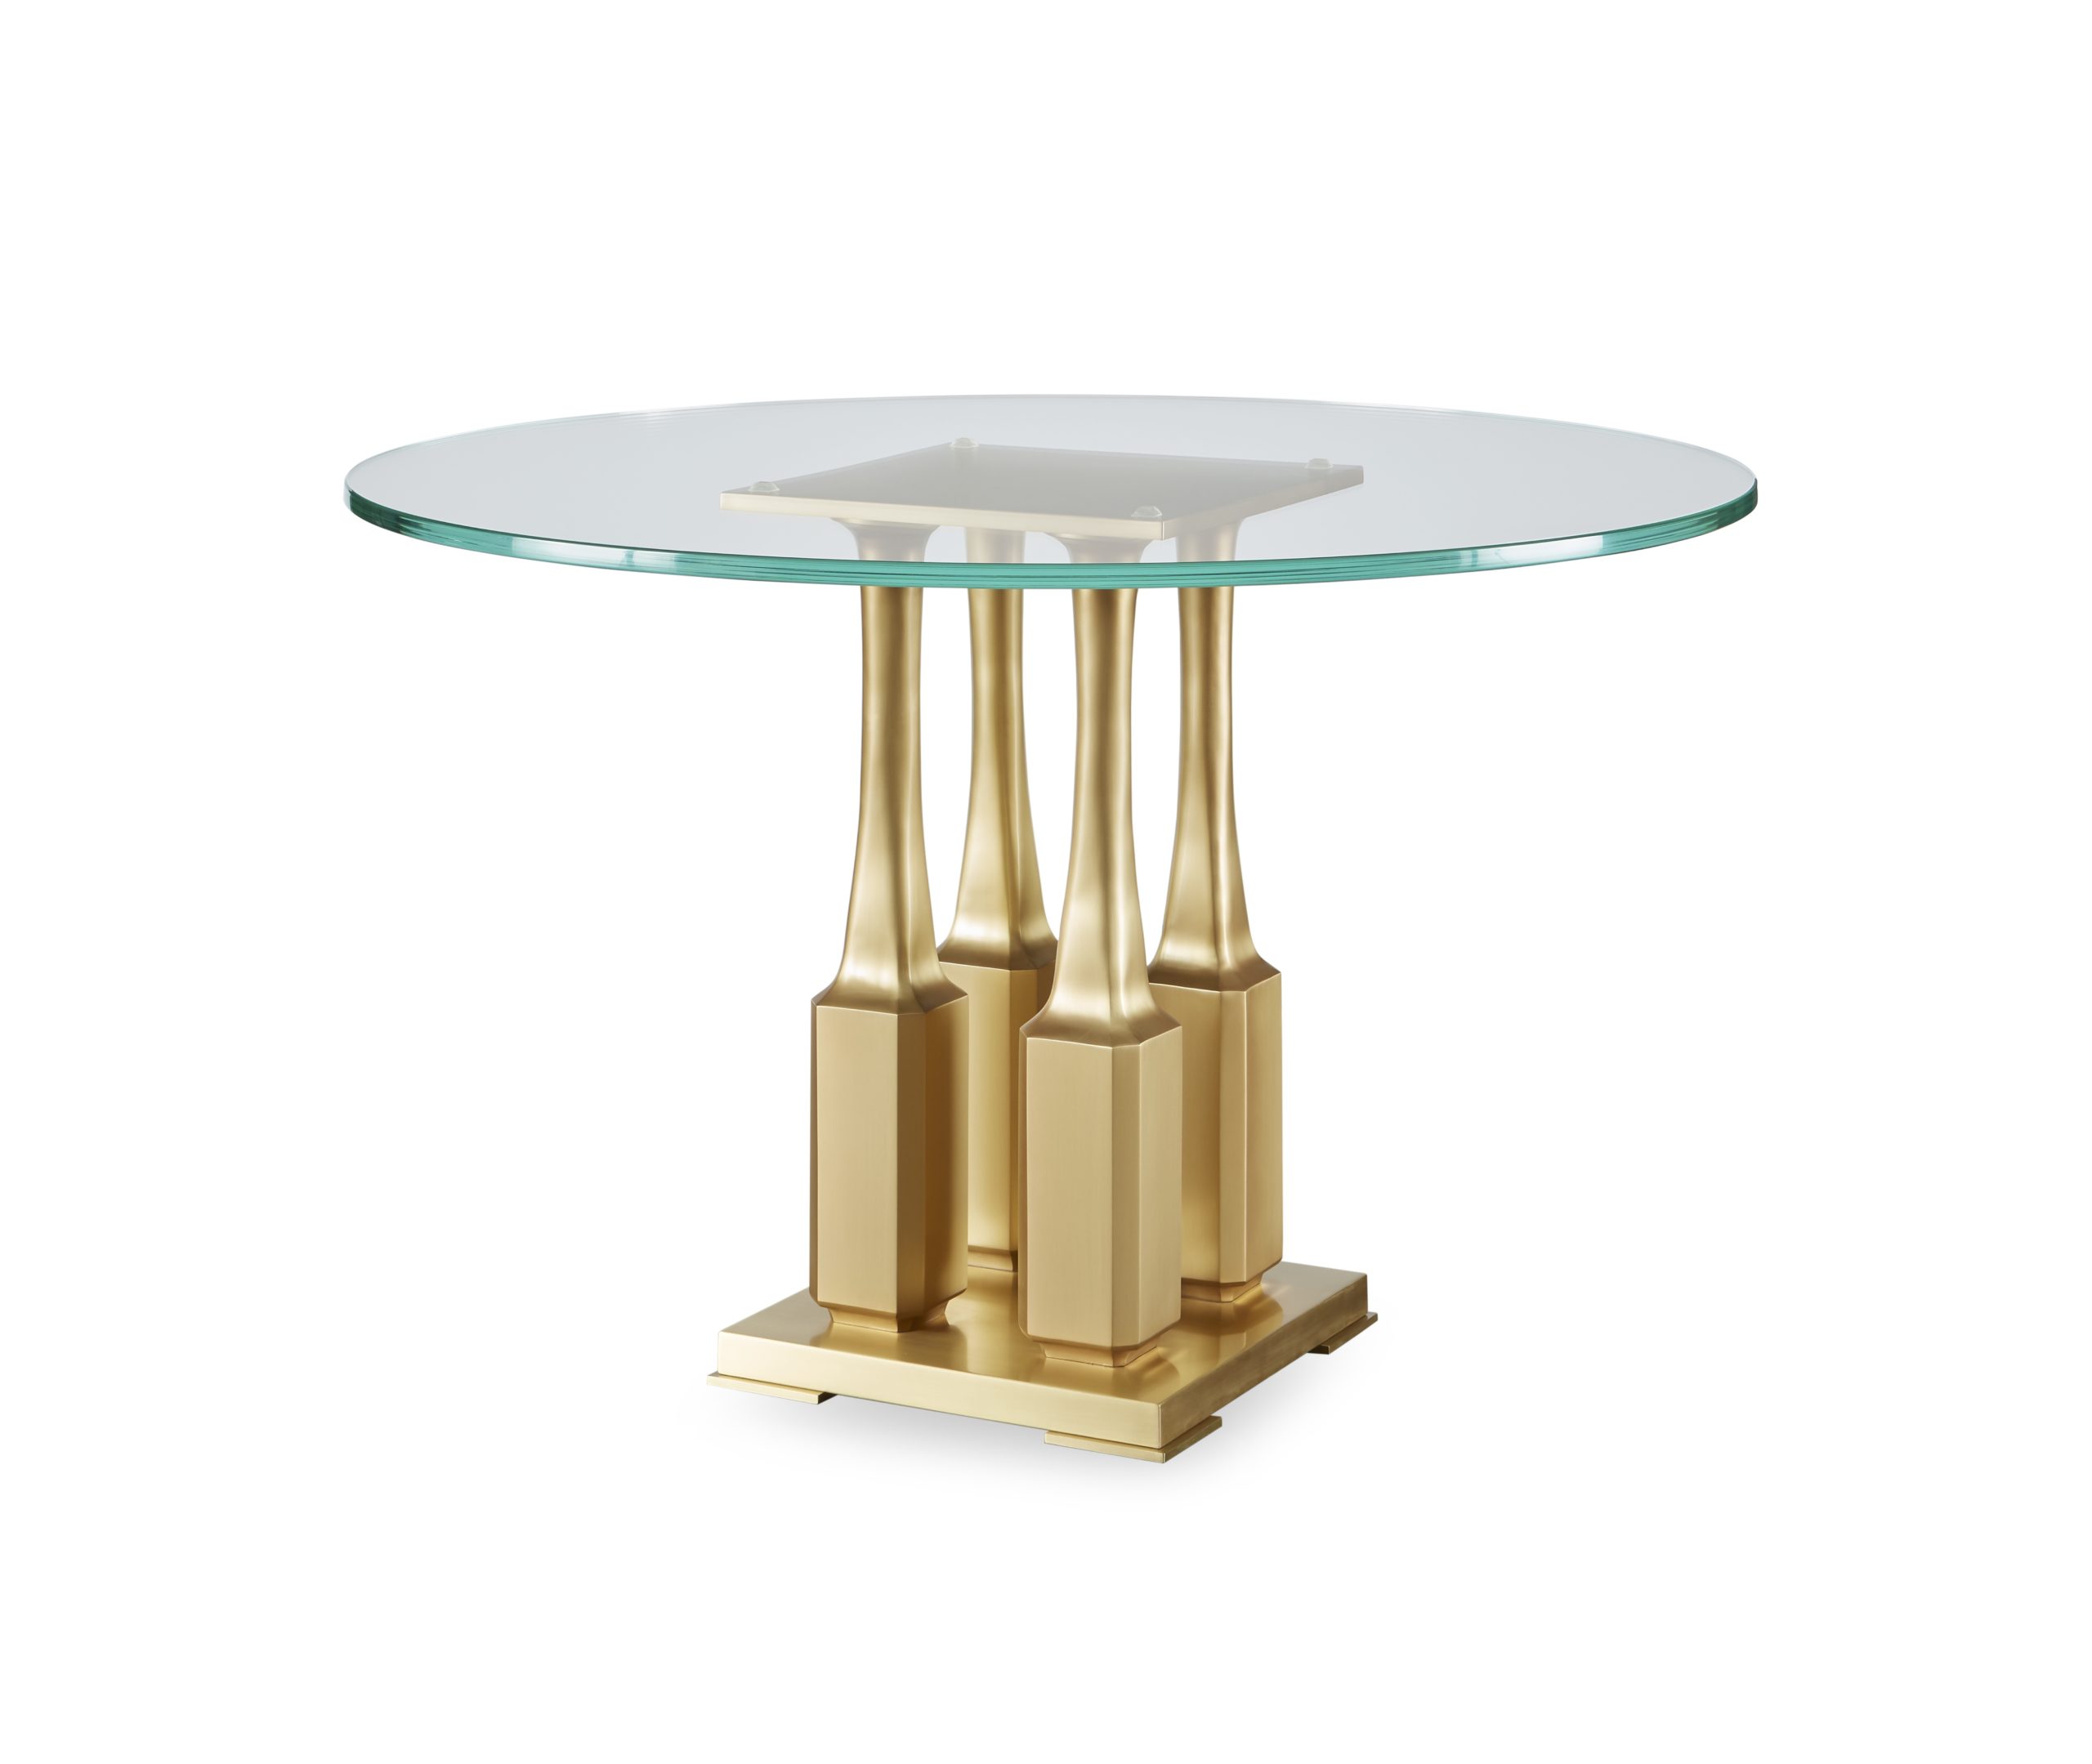 Baker_products_WNWN_villa_dining_table_BAA3237_ROUND_FRONT_3QRT-scaled-2